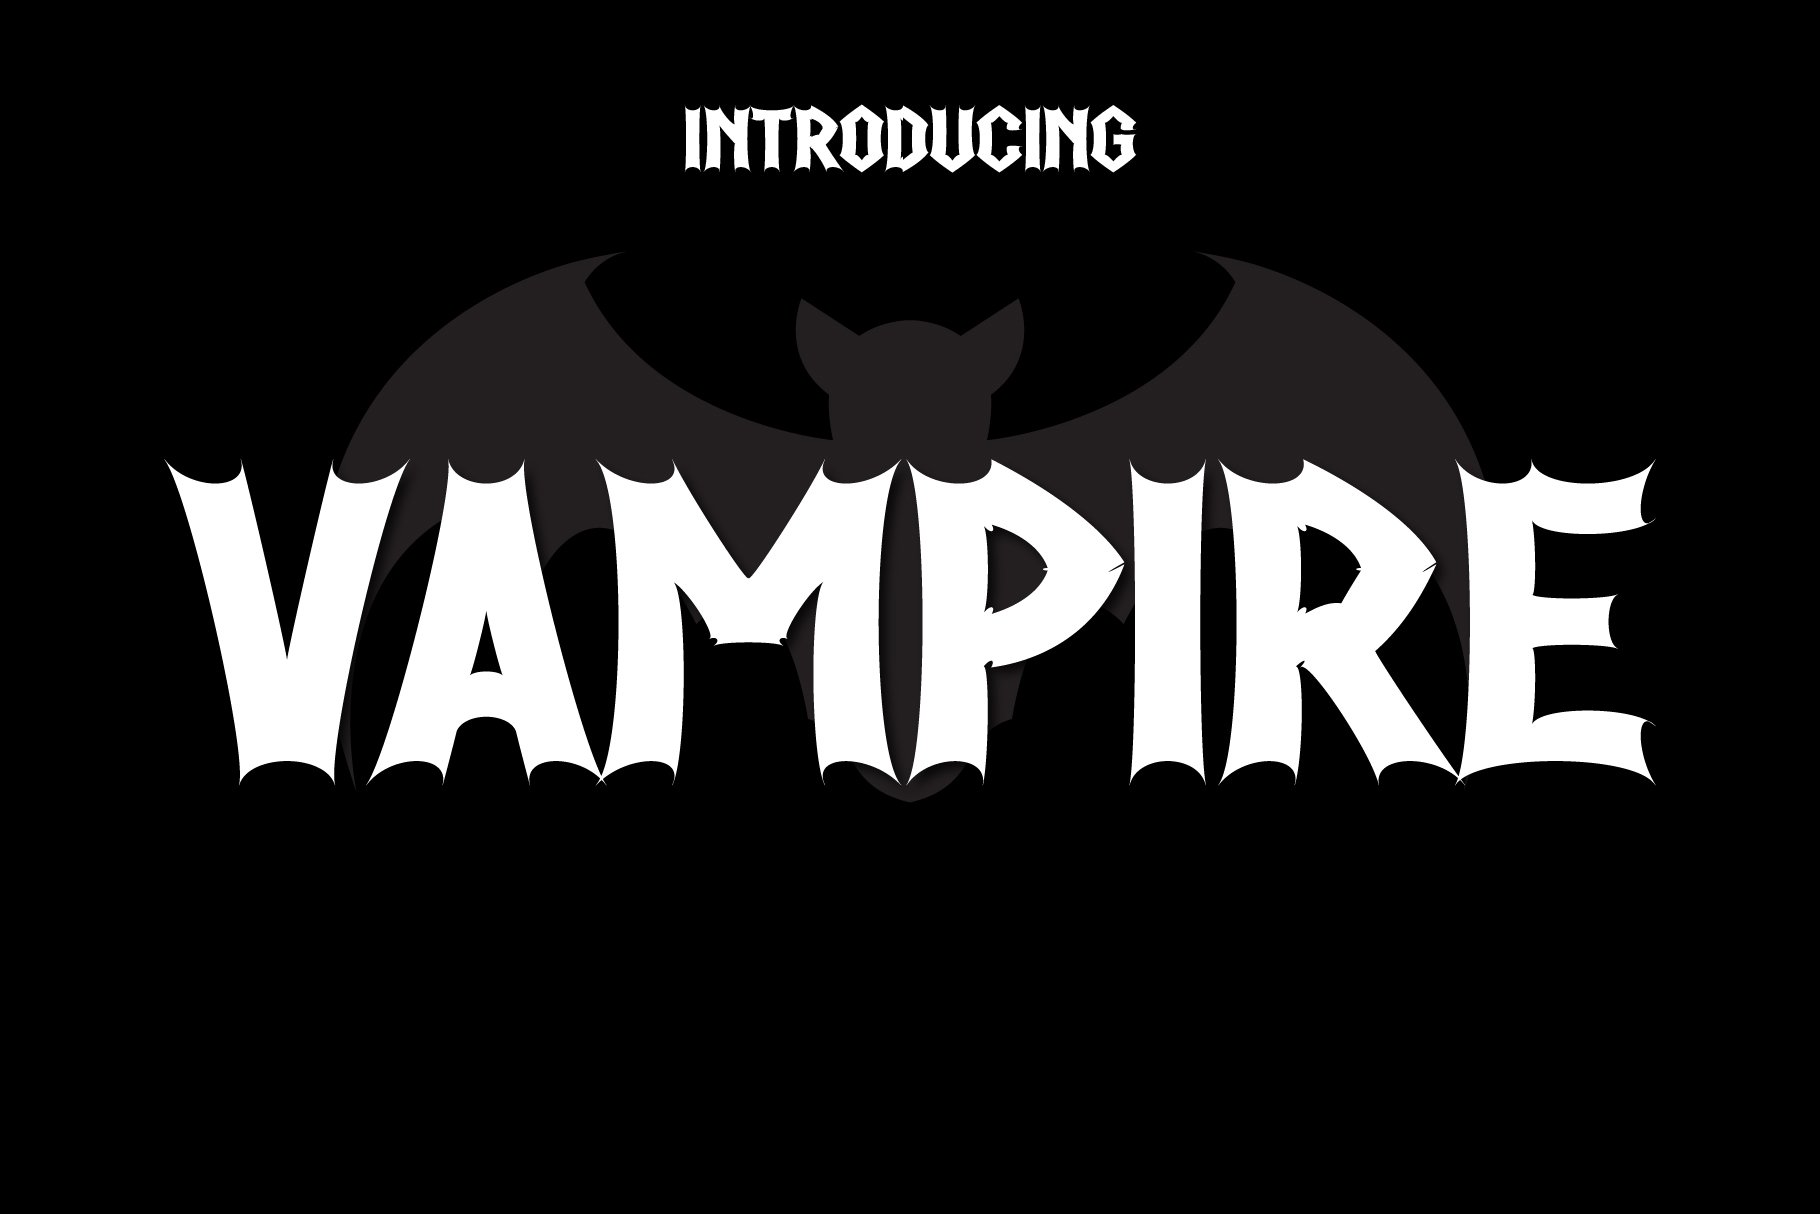 Vampire Fonts cover image.